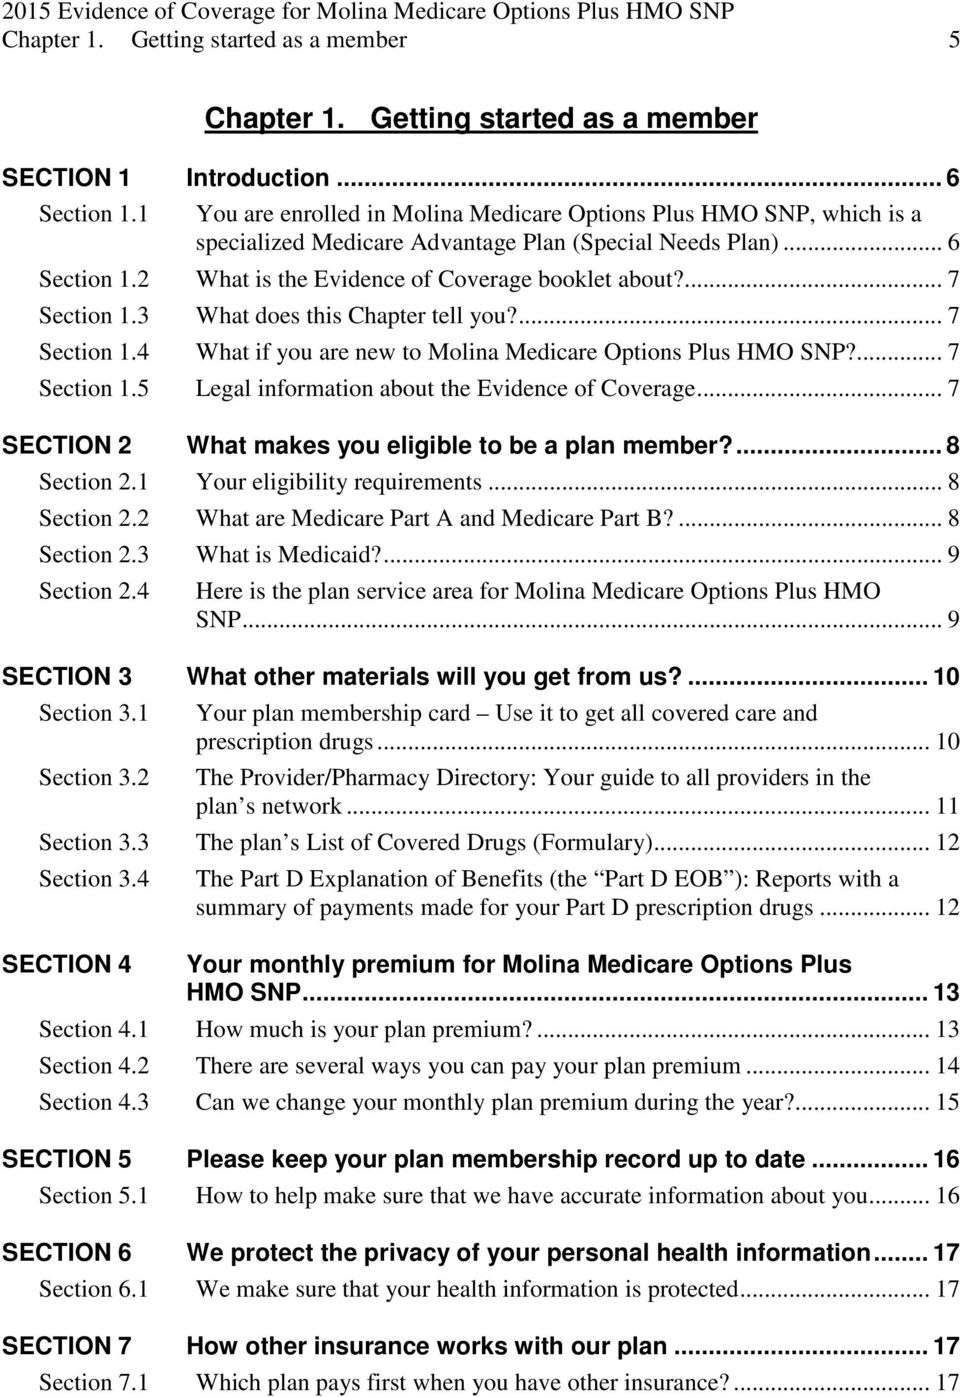 ... 7 Section 1.3 What does this Chapter tell you?... 7 Section 1.4 What if you are new to Molina Medicare Options Plus HMO SNP?... 7 Section 1.5 Legal information about the Evidence of Coverage.